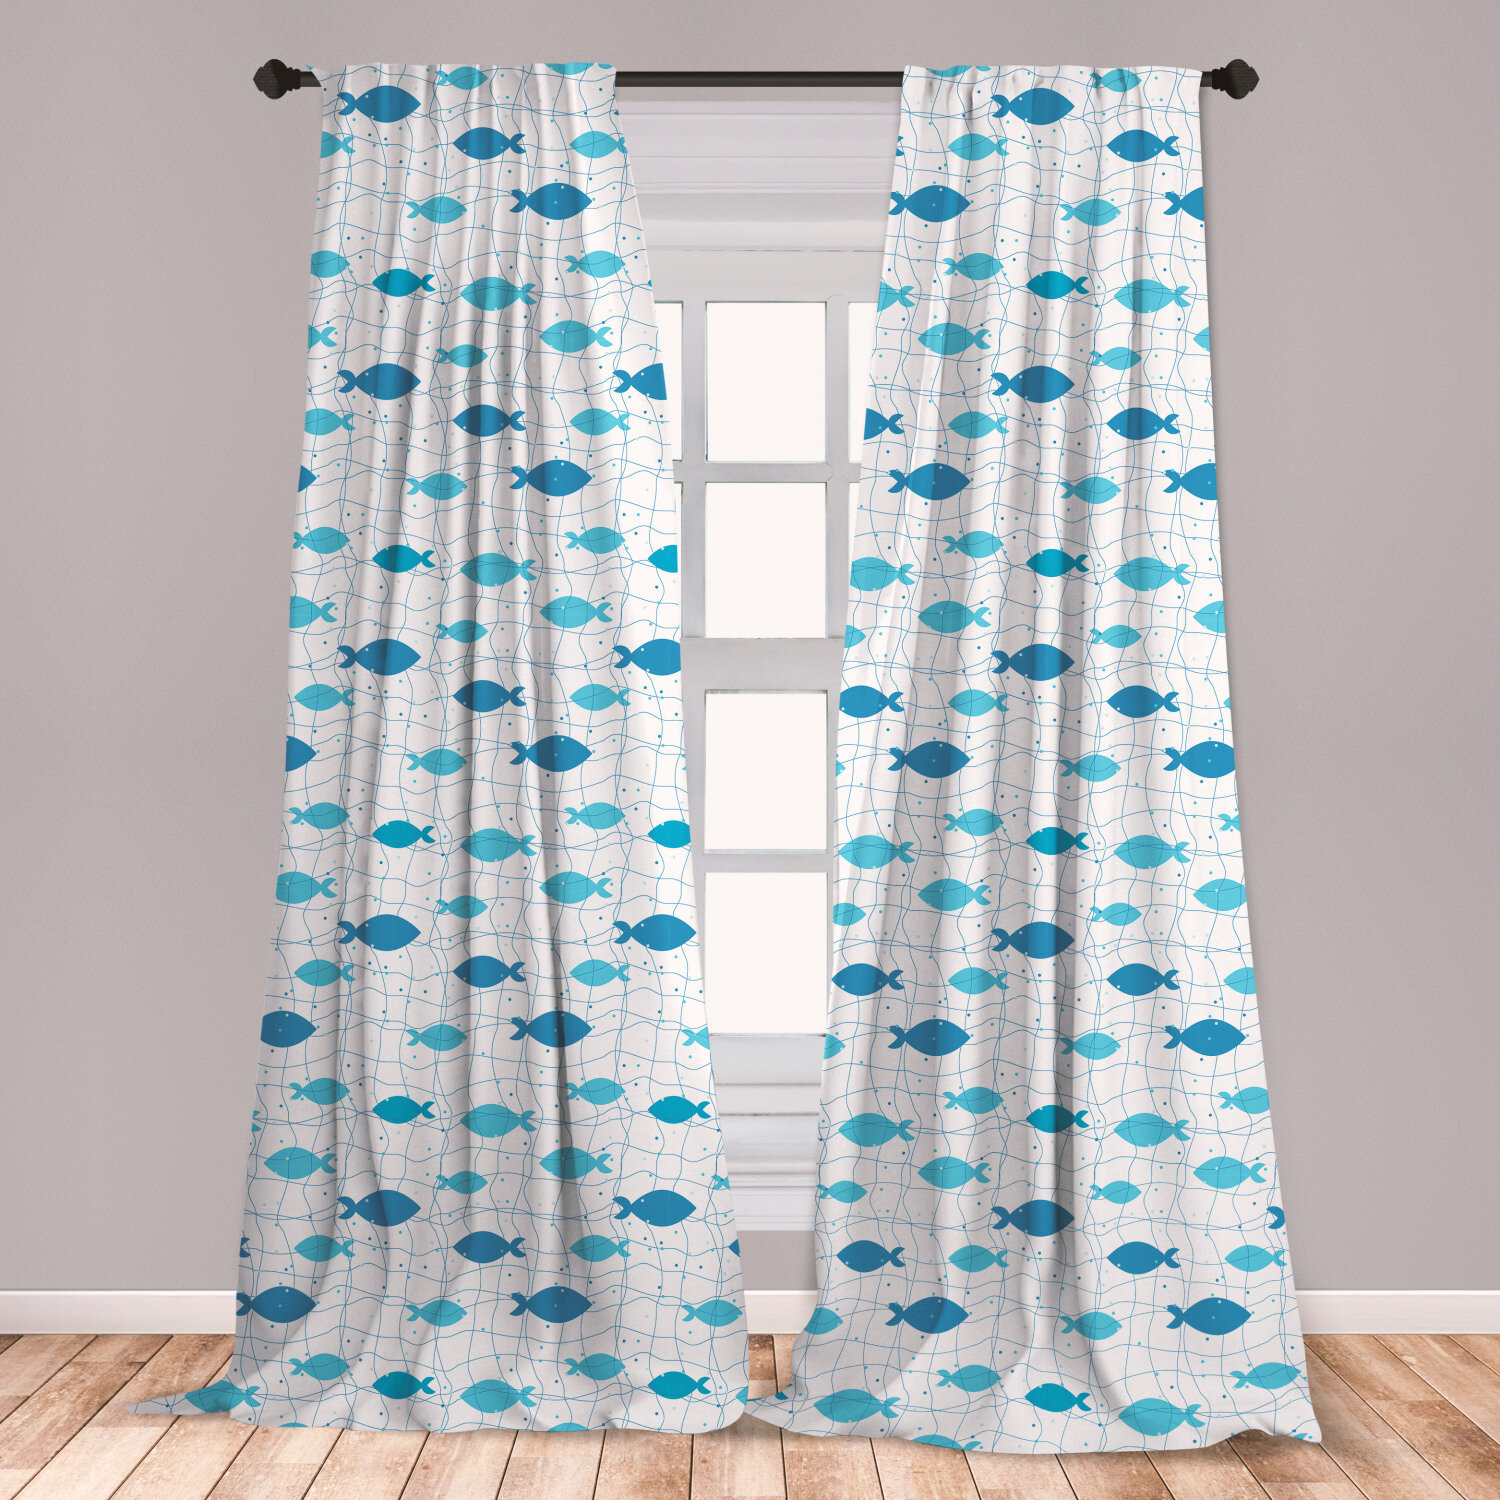 Blue sc_20583_extralong 84 Inches Extra Long Artisan Fish Patterns with Wave Lines and Sky Cloud Motifs Marine Life Image Fabric Bathroom Decor Set with Hooks Ocean Animal Decor Shower Curtain by Ambesonne 